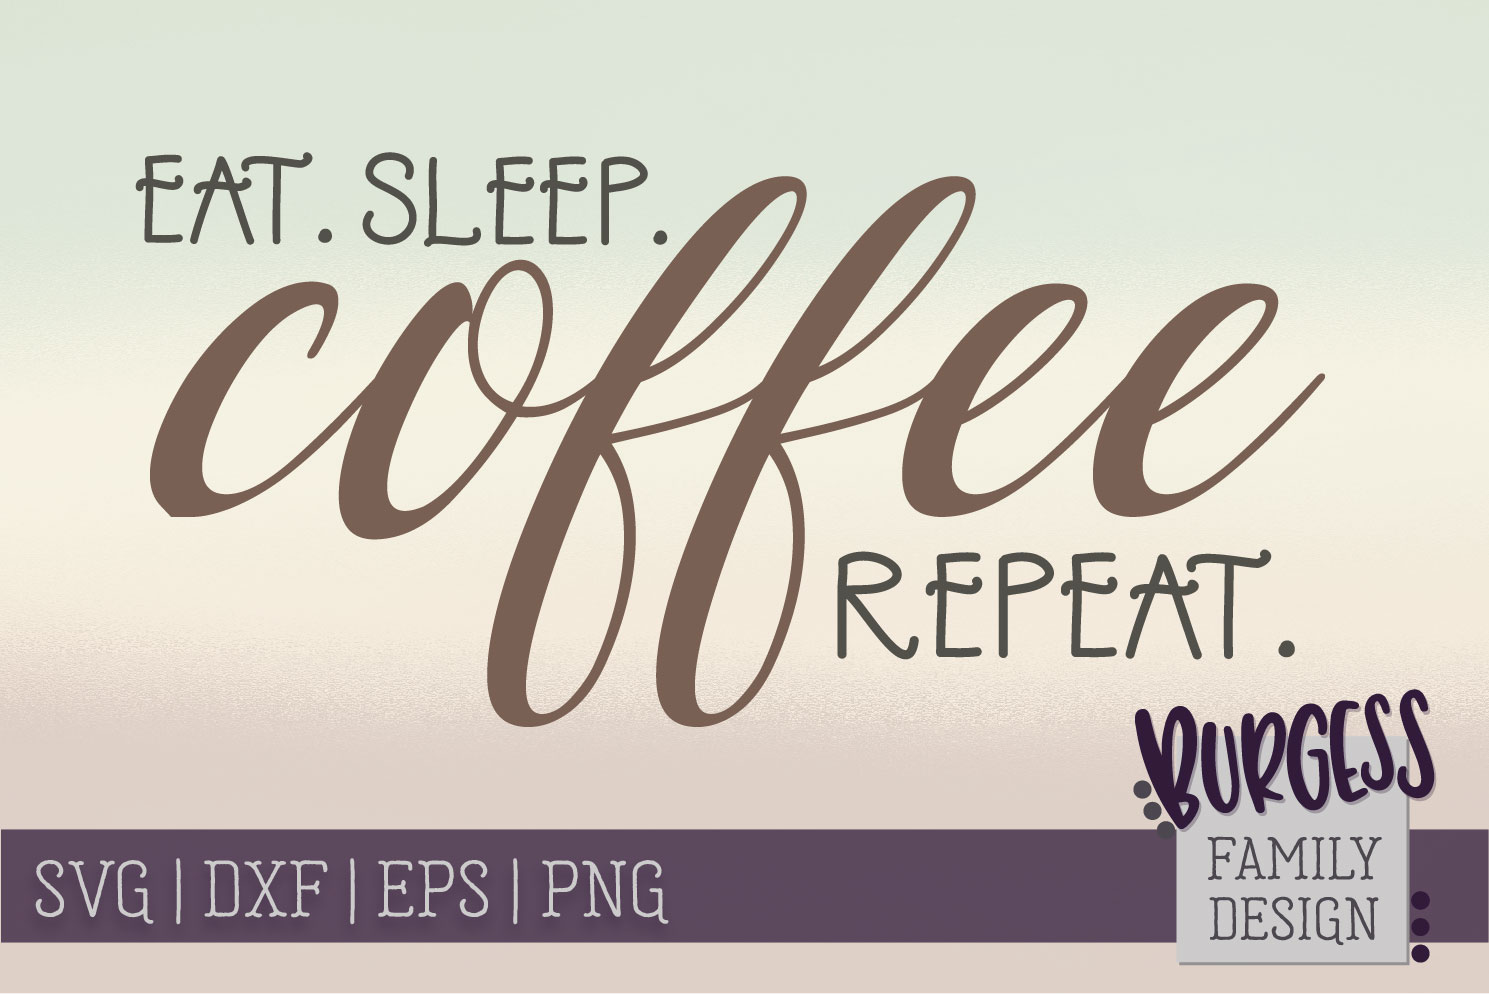 Download Eat. Sleep. COFFEE Repeat. | SVG DXF EPS PNG (136348 ...